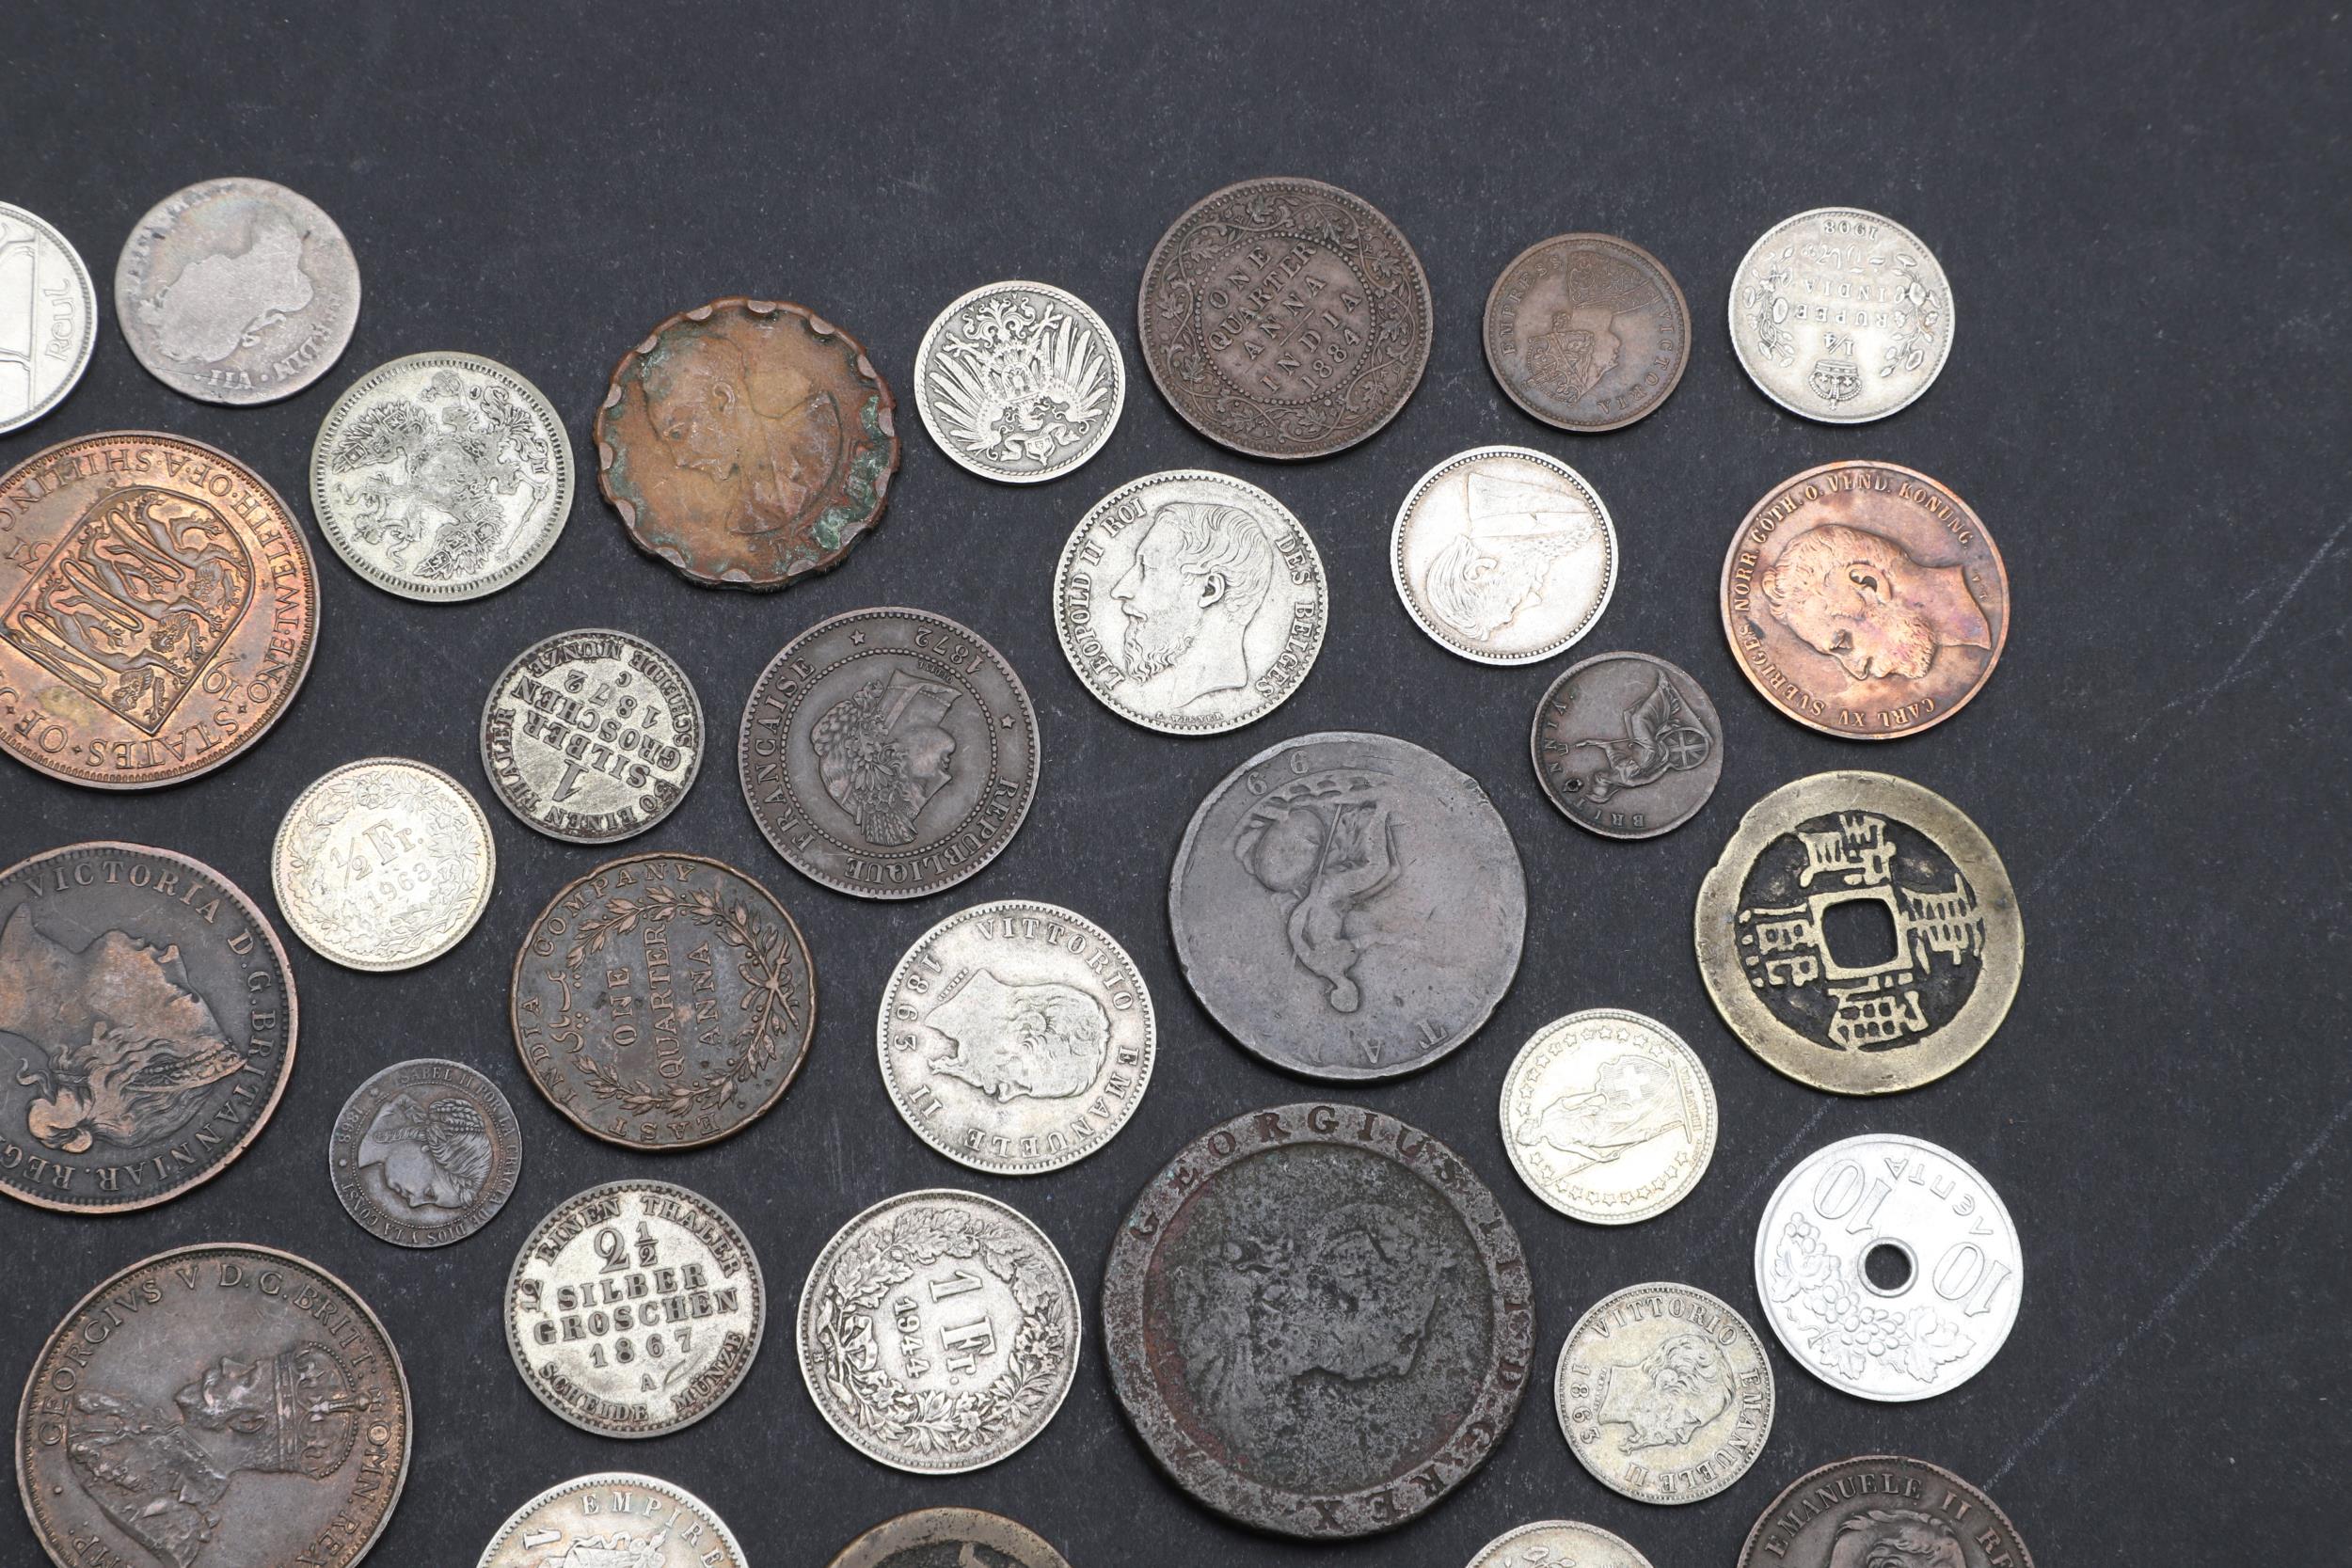 A COLLECTION OF WORLD COINS INCLUDING A NAPOLEON III 5 FRANC COIN. - Image 3 of 5